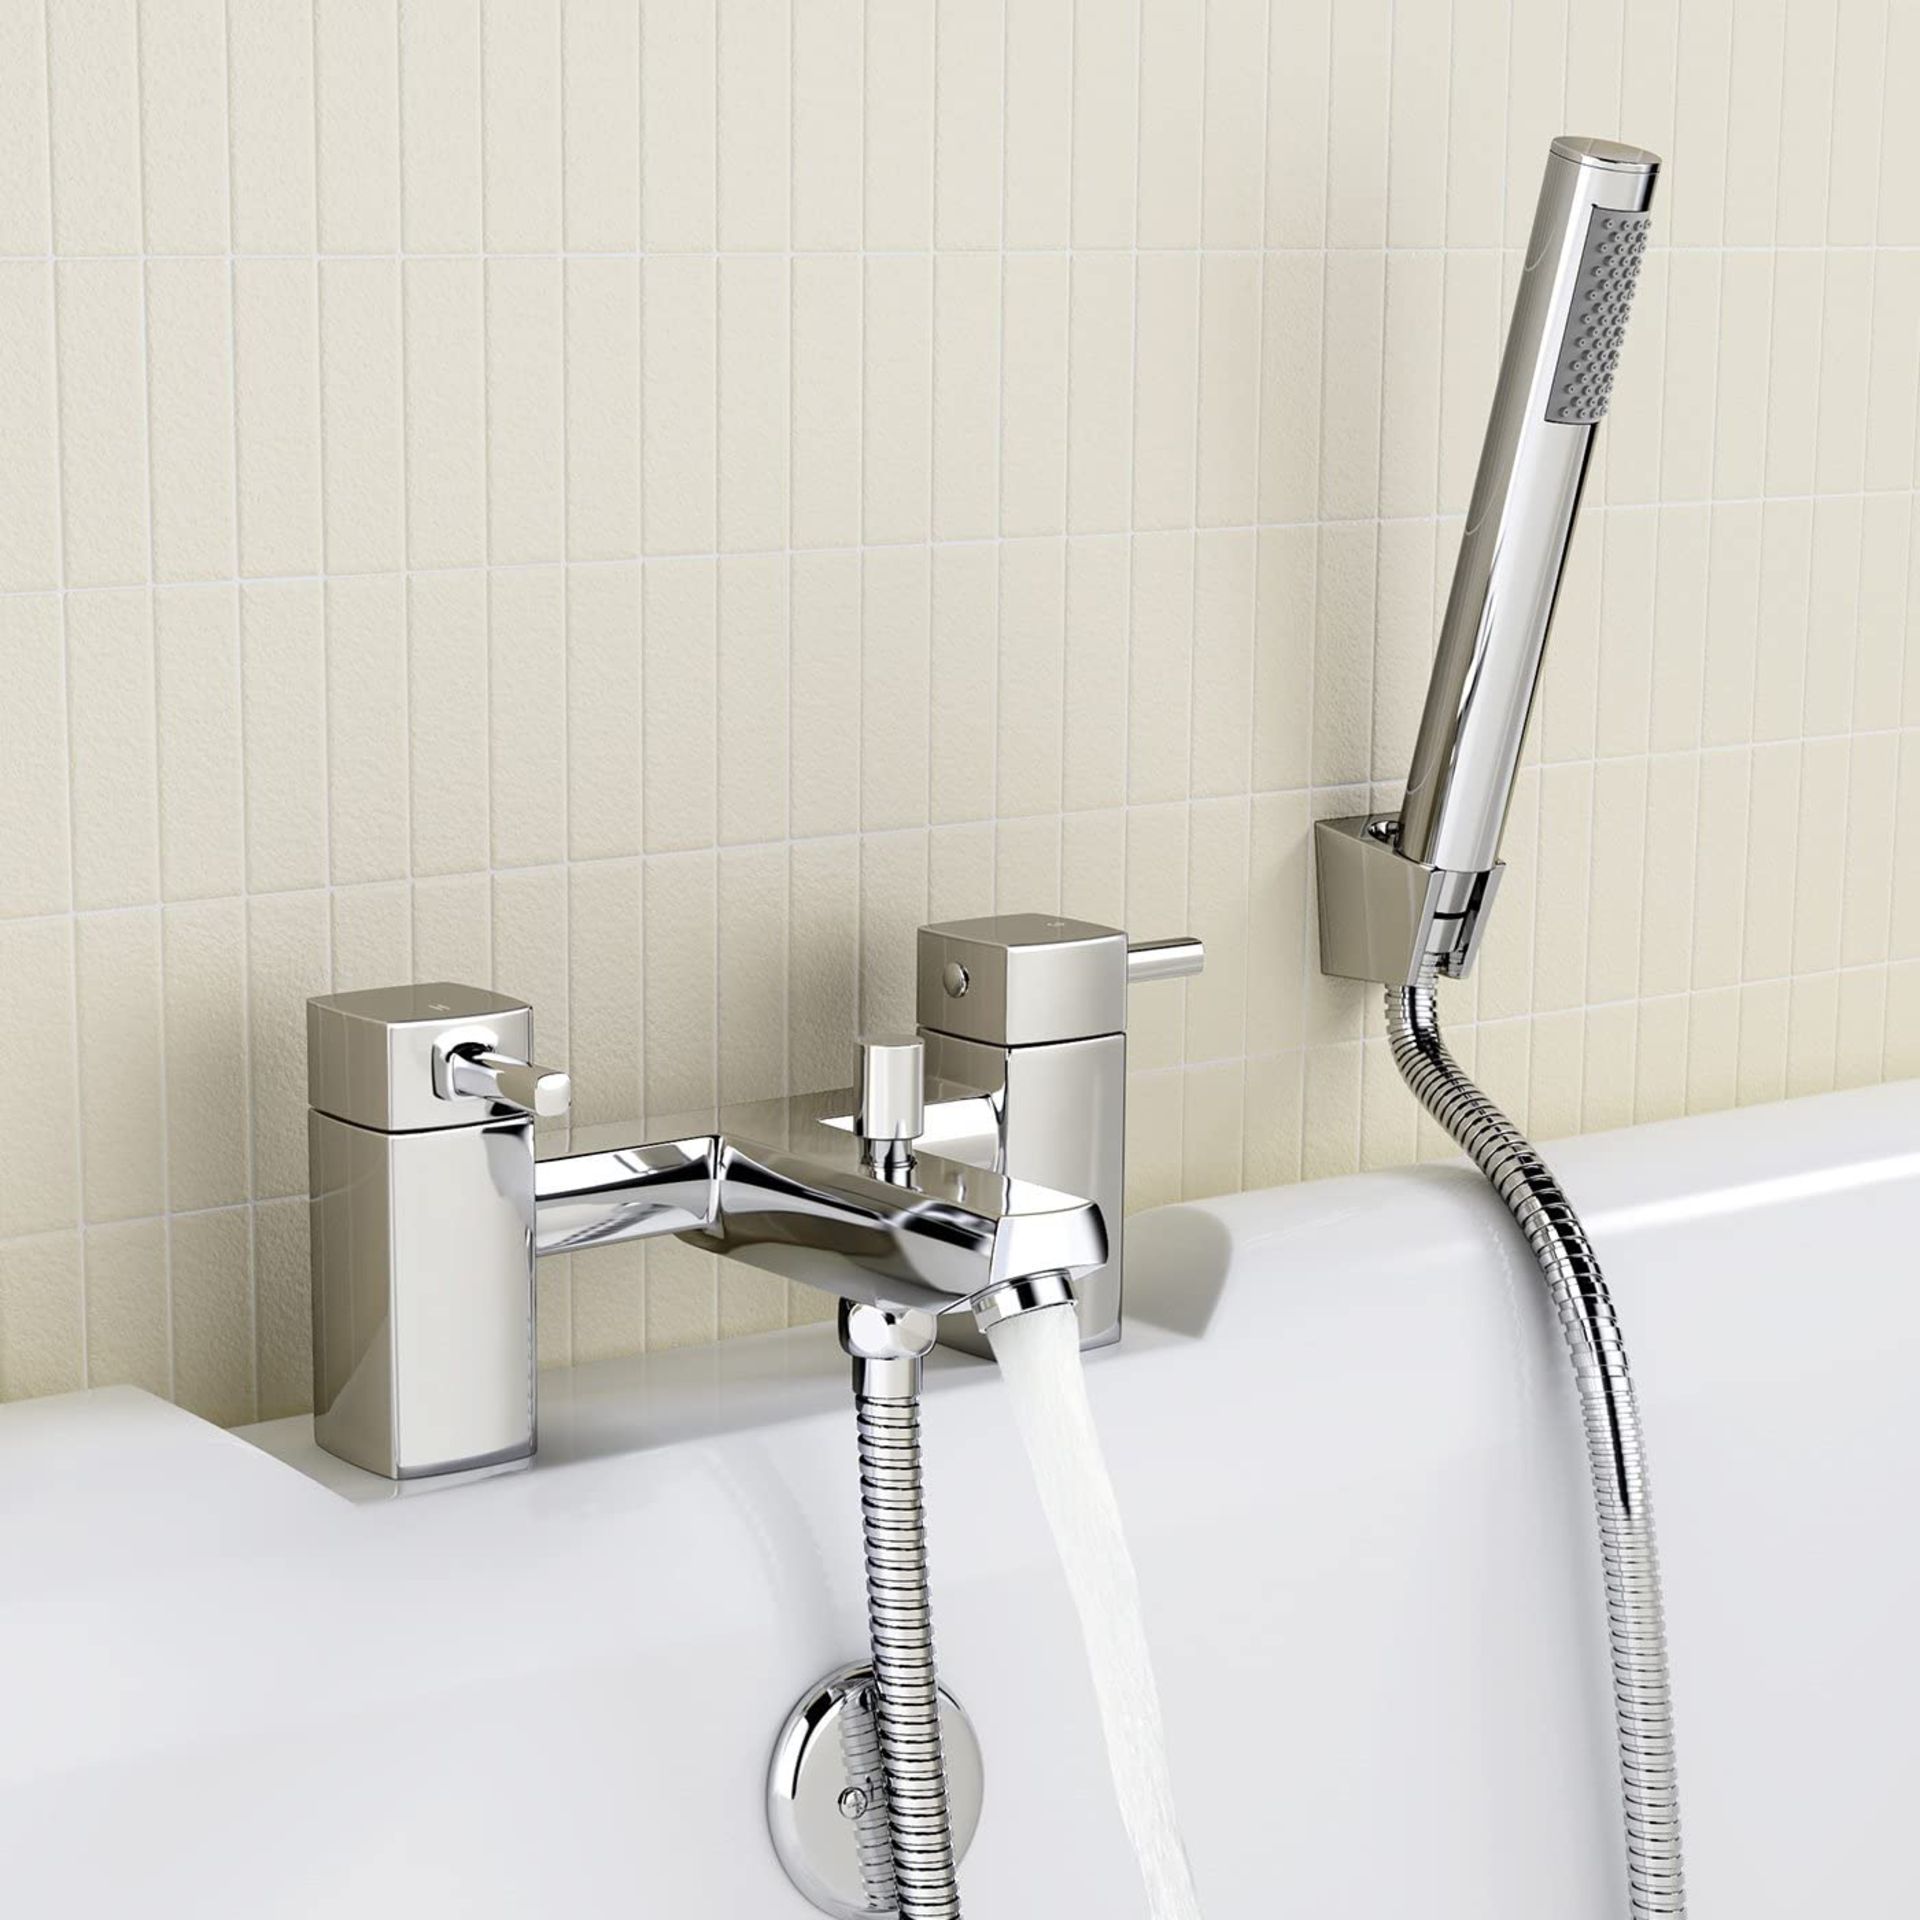 (MG1003) Square Bath Filler Mixer Tap with Modern Bathroom Shower Head . Chrome plated solid b...